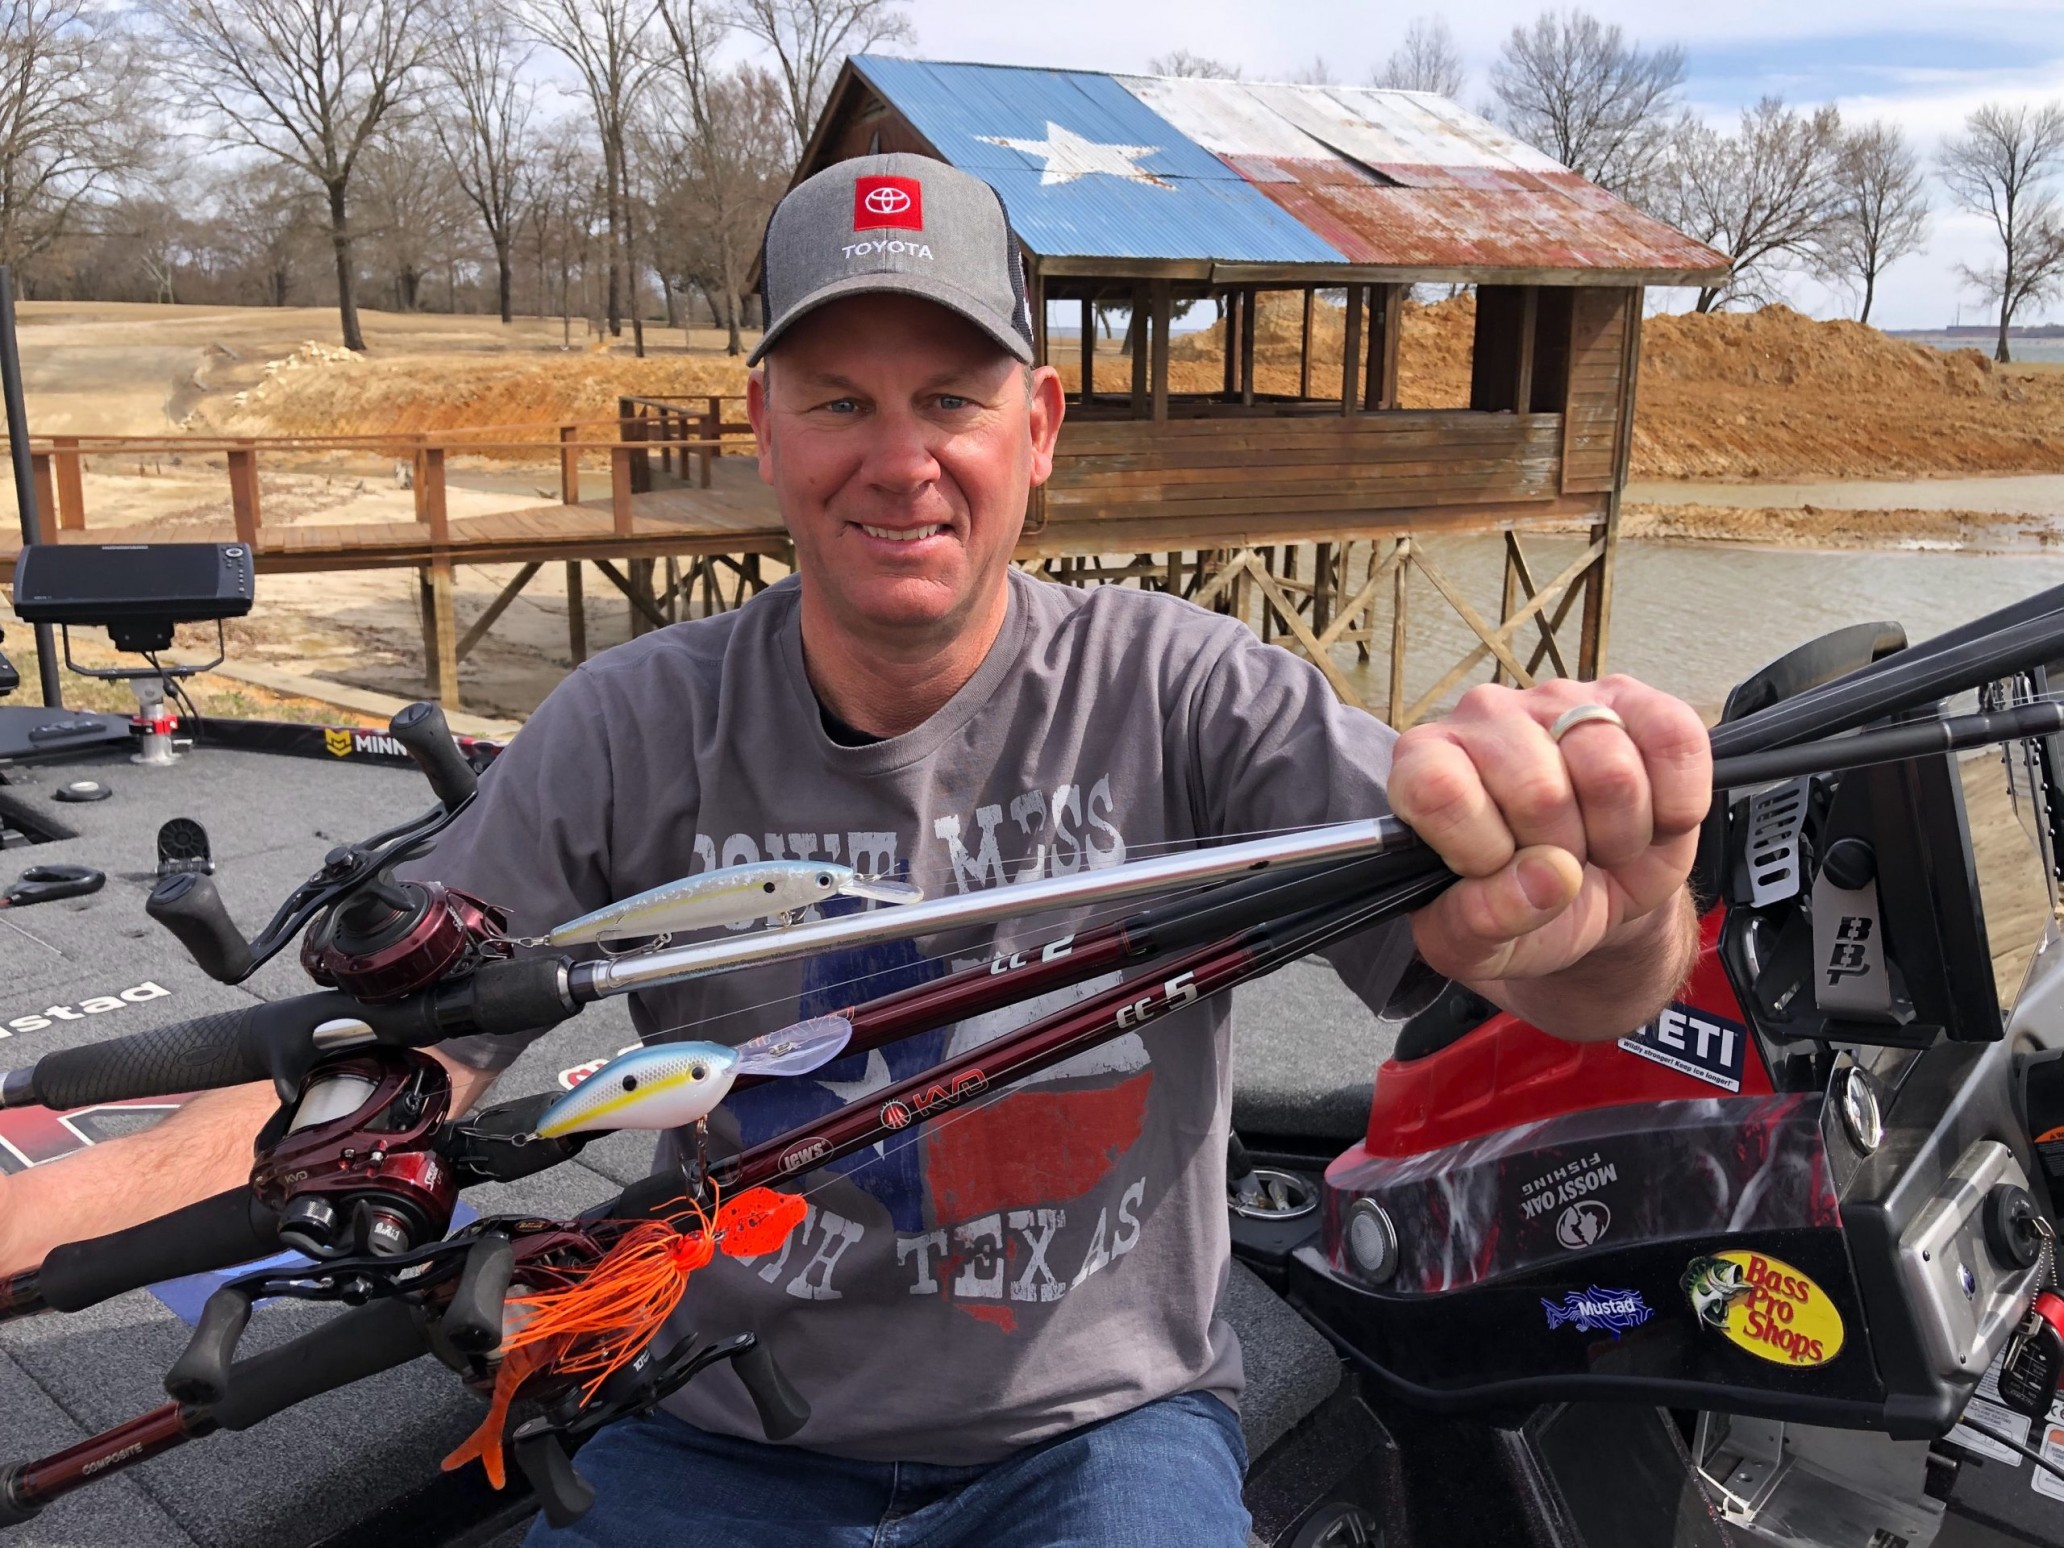 Mike “IKE” Iaconelli on X: I had a great few days down in Texas at Sam  Rayburn shooting some photos and videos for Toyota! Now it's time to get  back to some